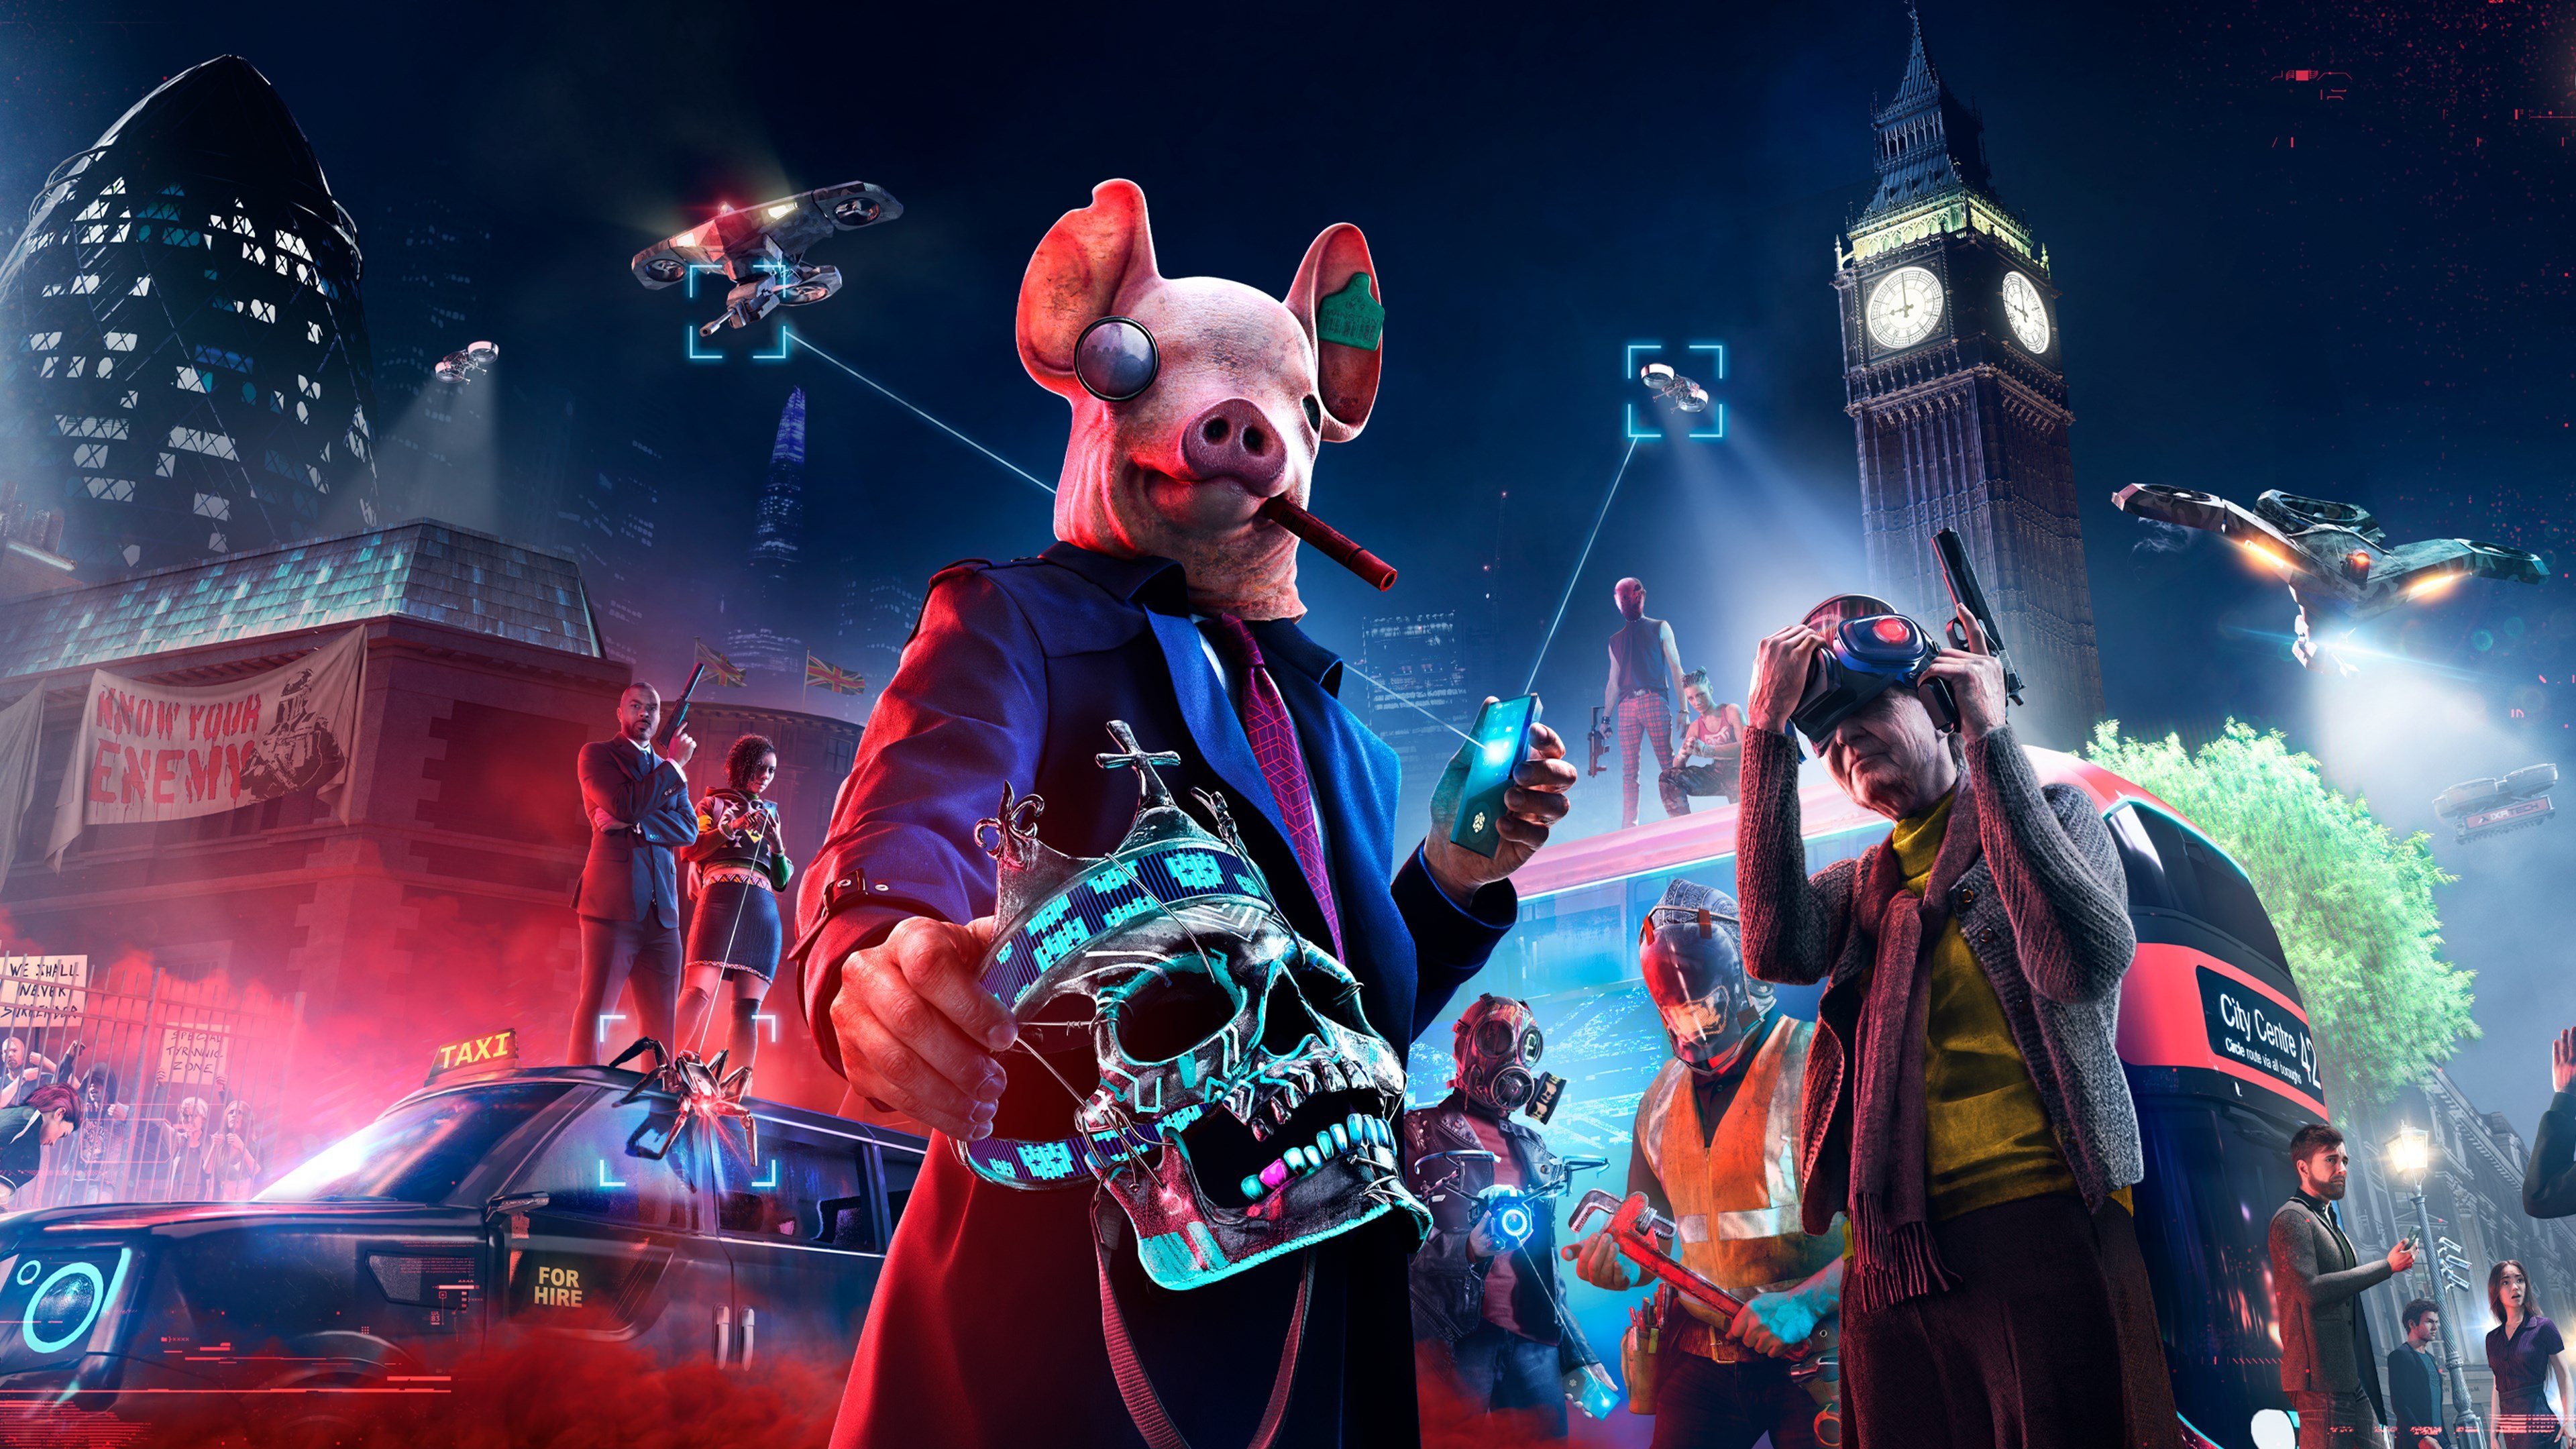 Watch Dogs: Legion cover image